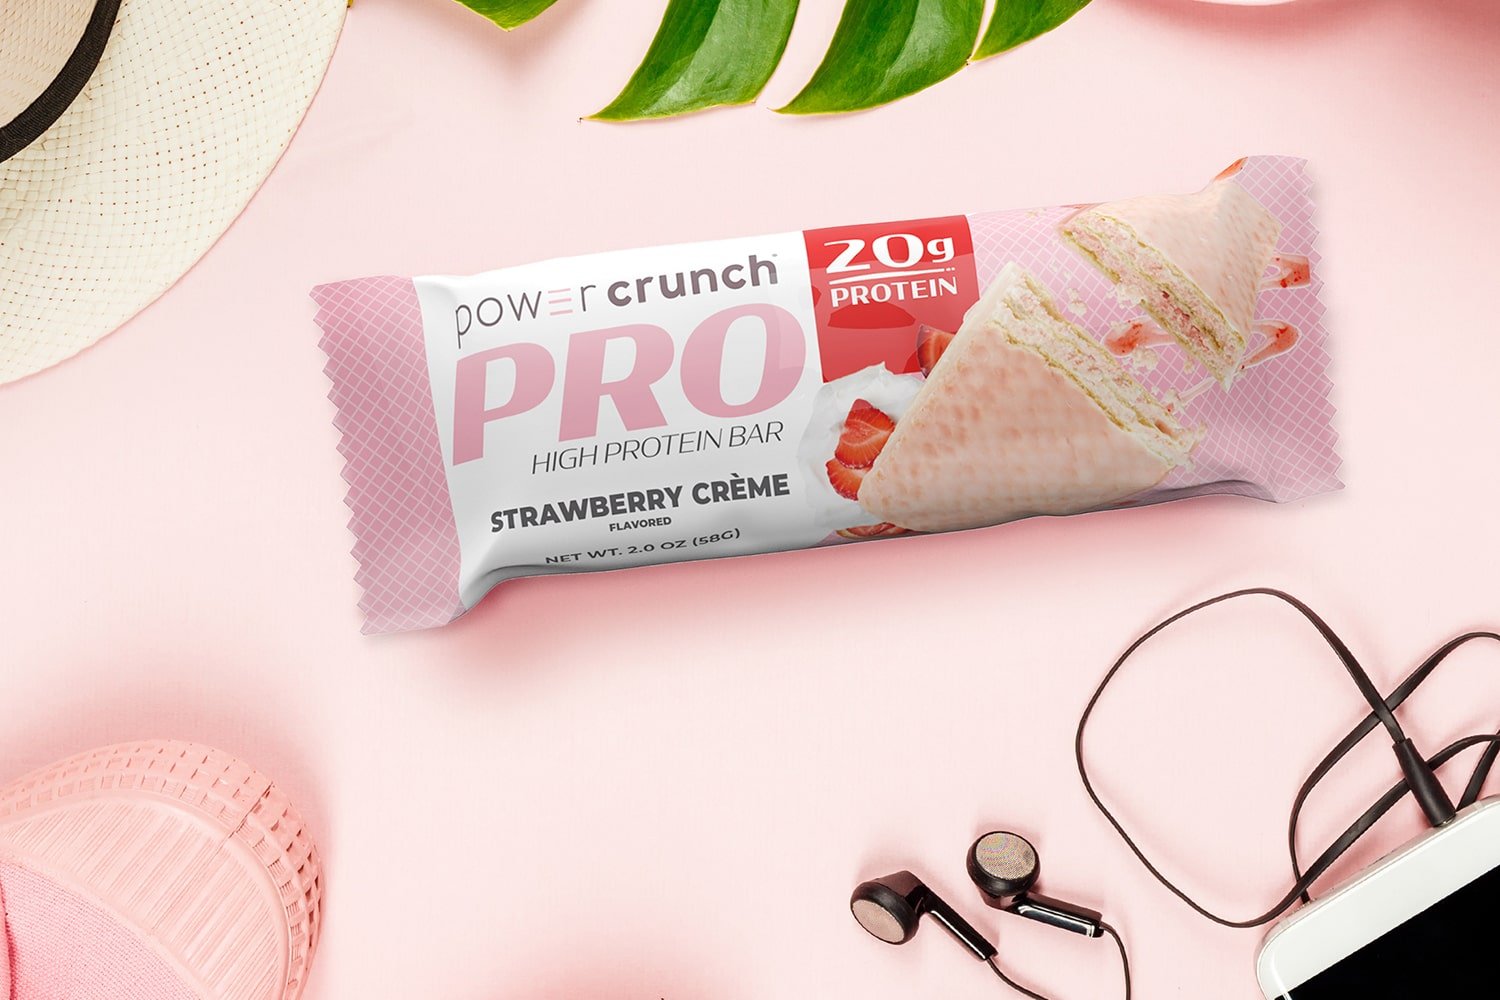 Strawberry high protein bars as an on-the-go snack